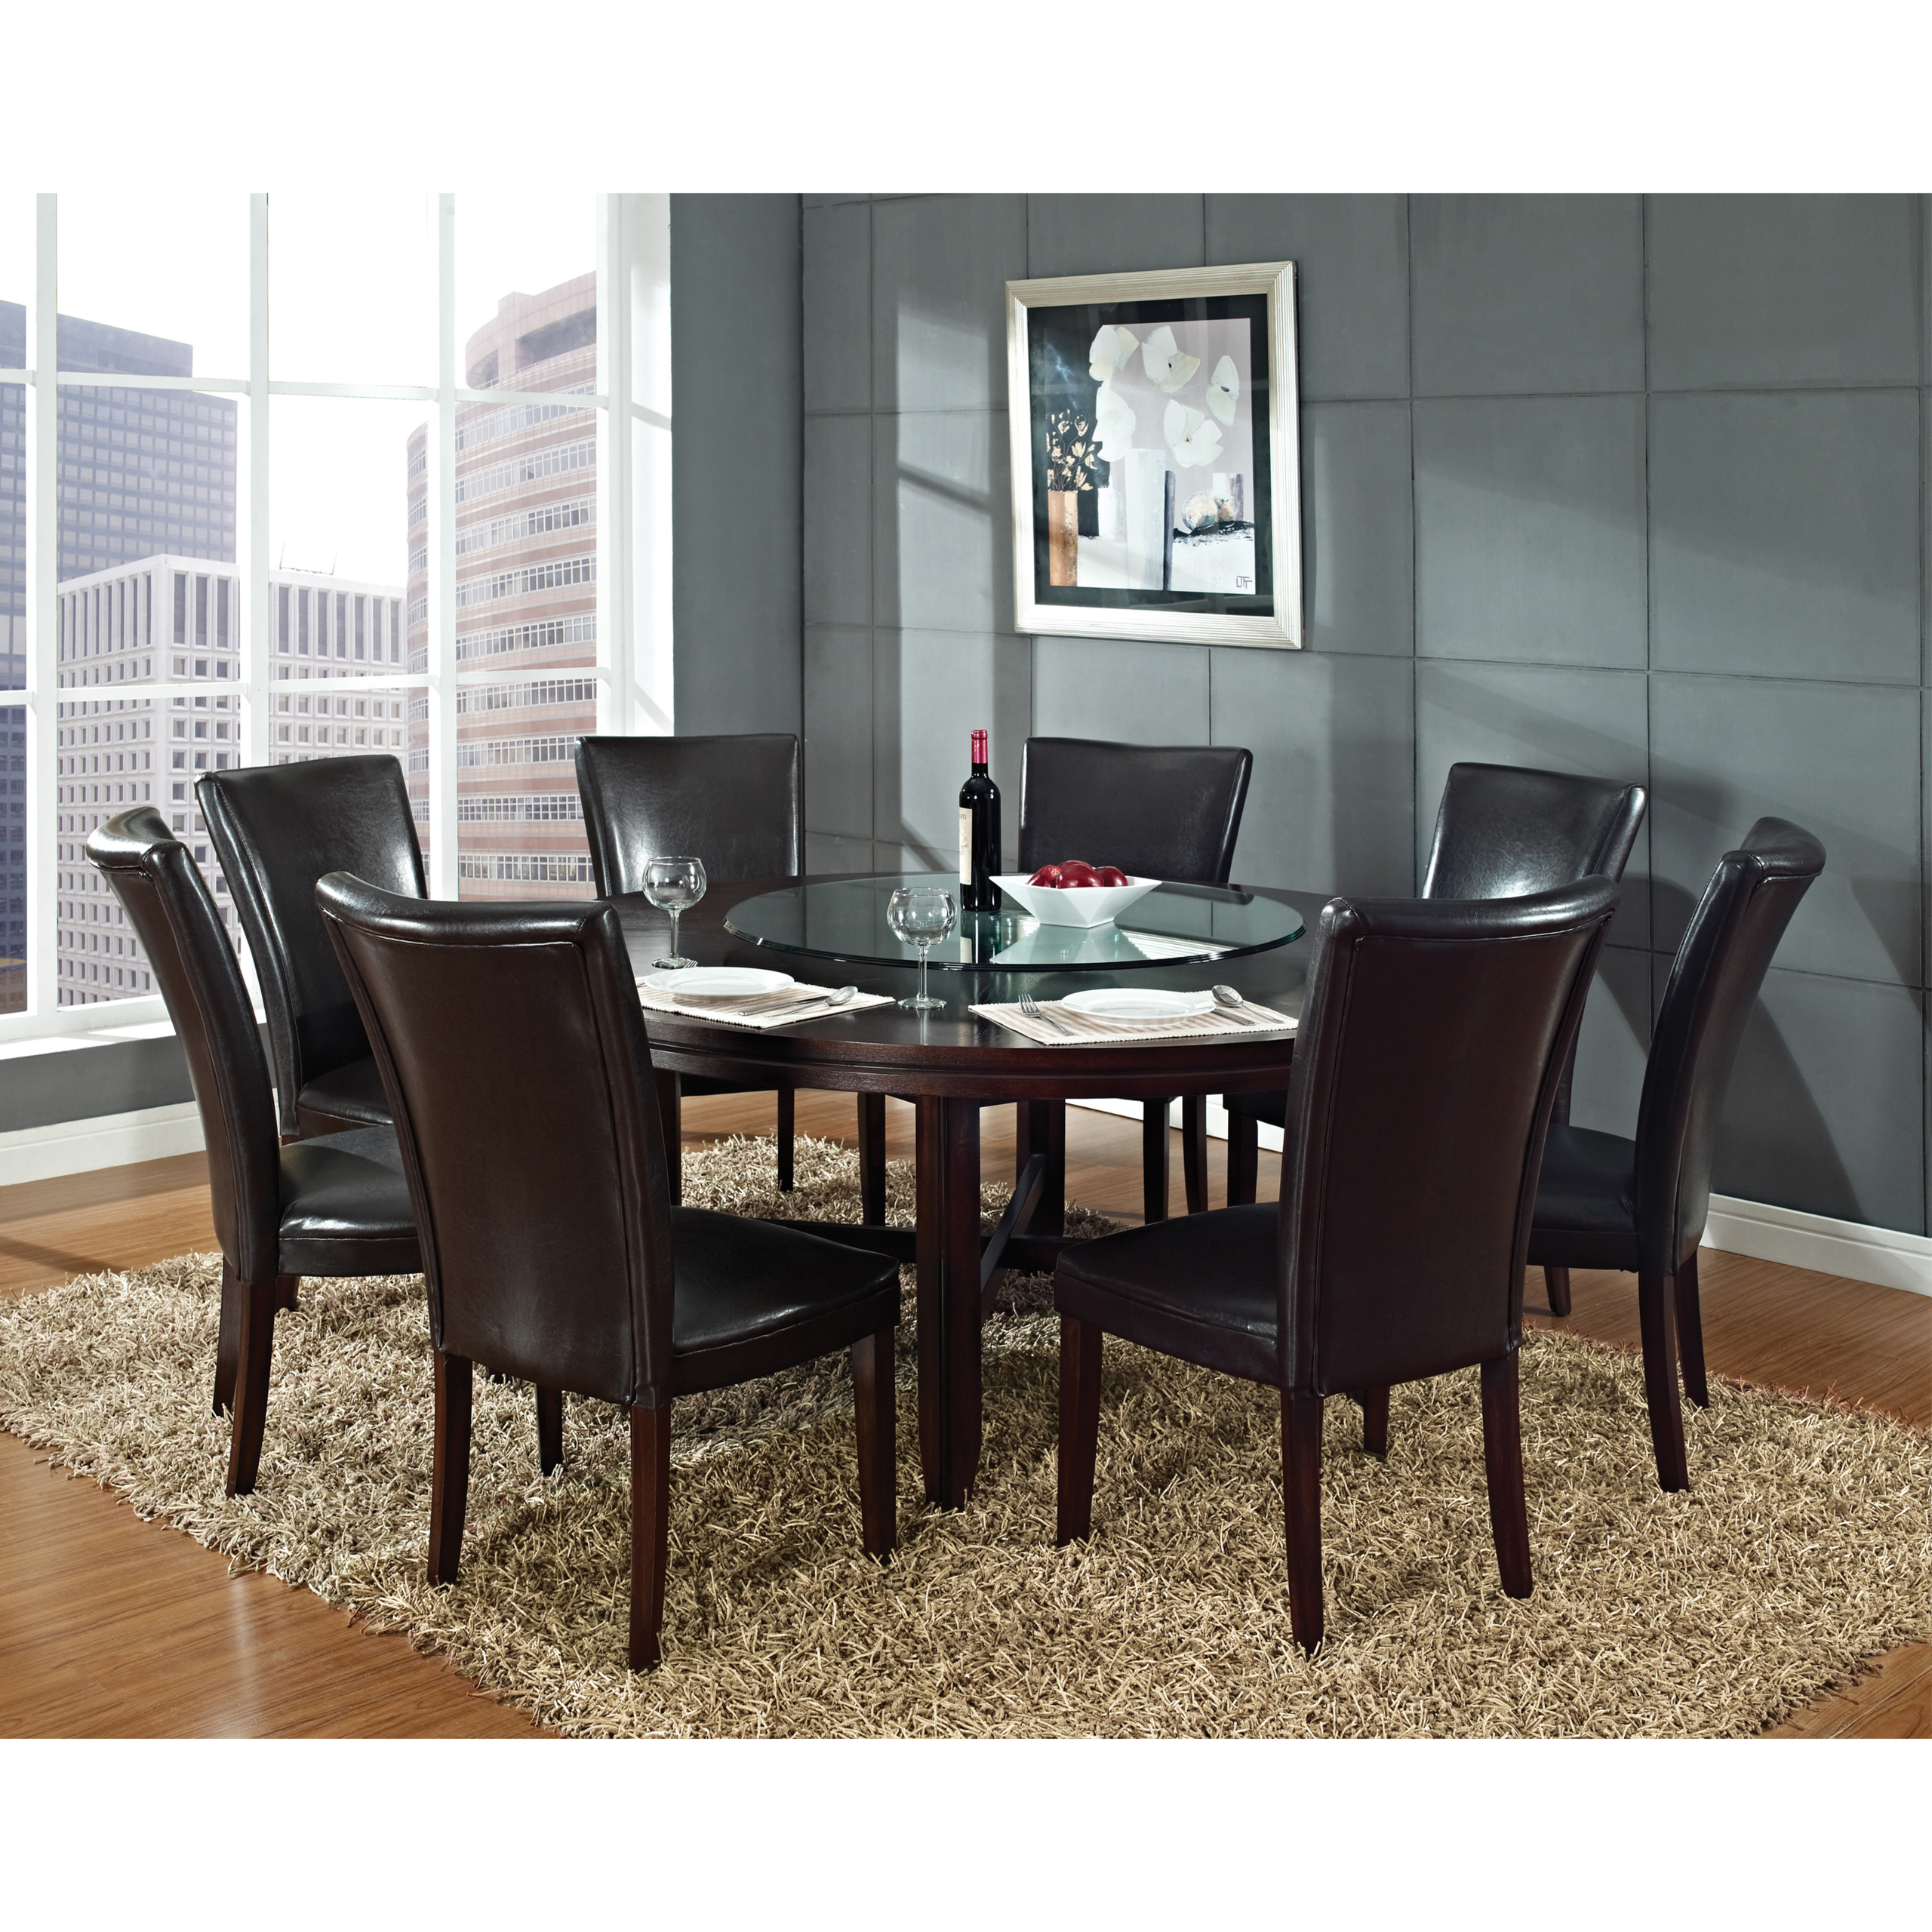 Round Dining Table For 6 Visualhunt, Round Dining Room Table Set For 8